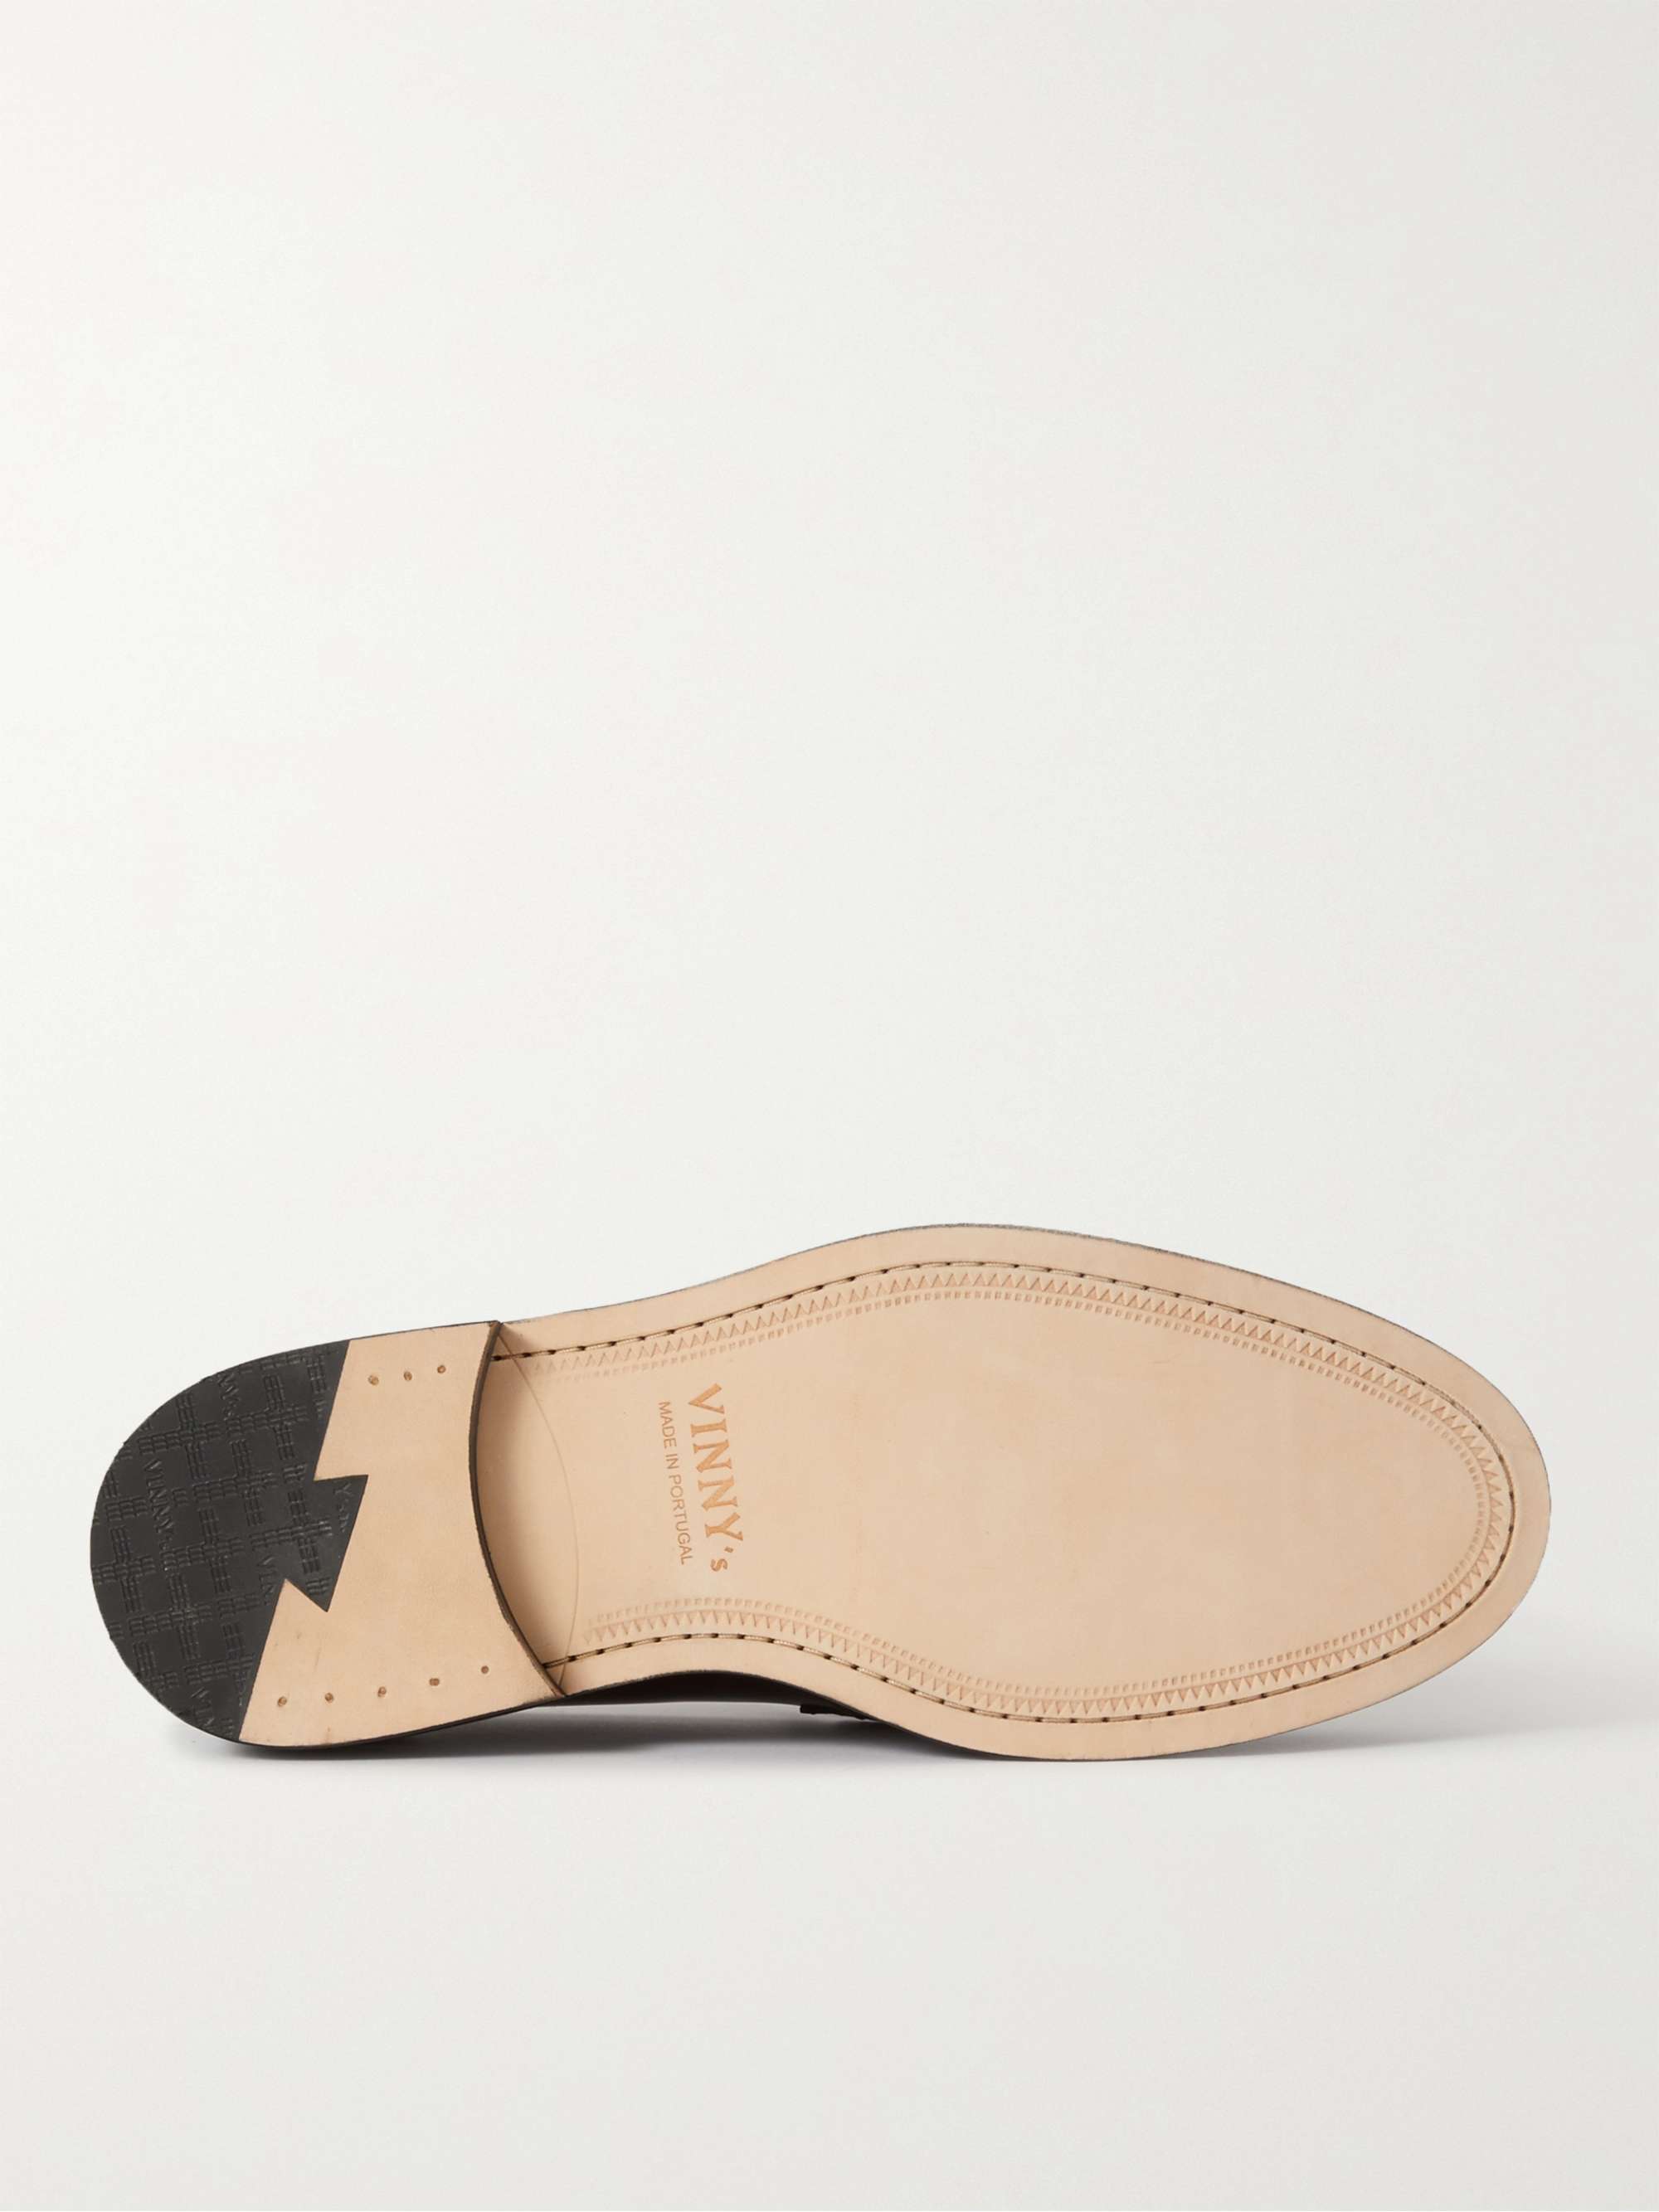 VINNY'S New Townee Leather Penny Loafers